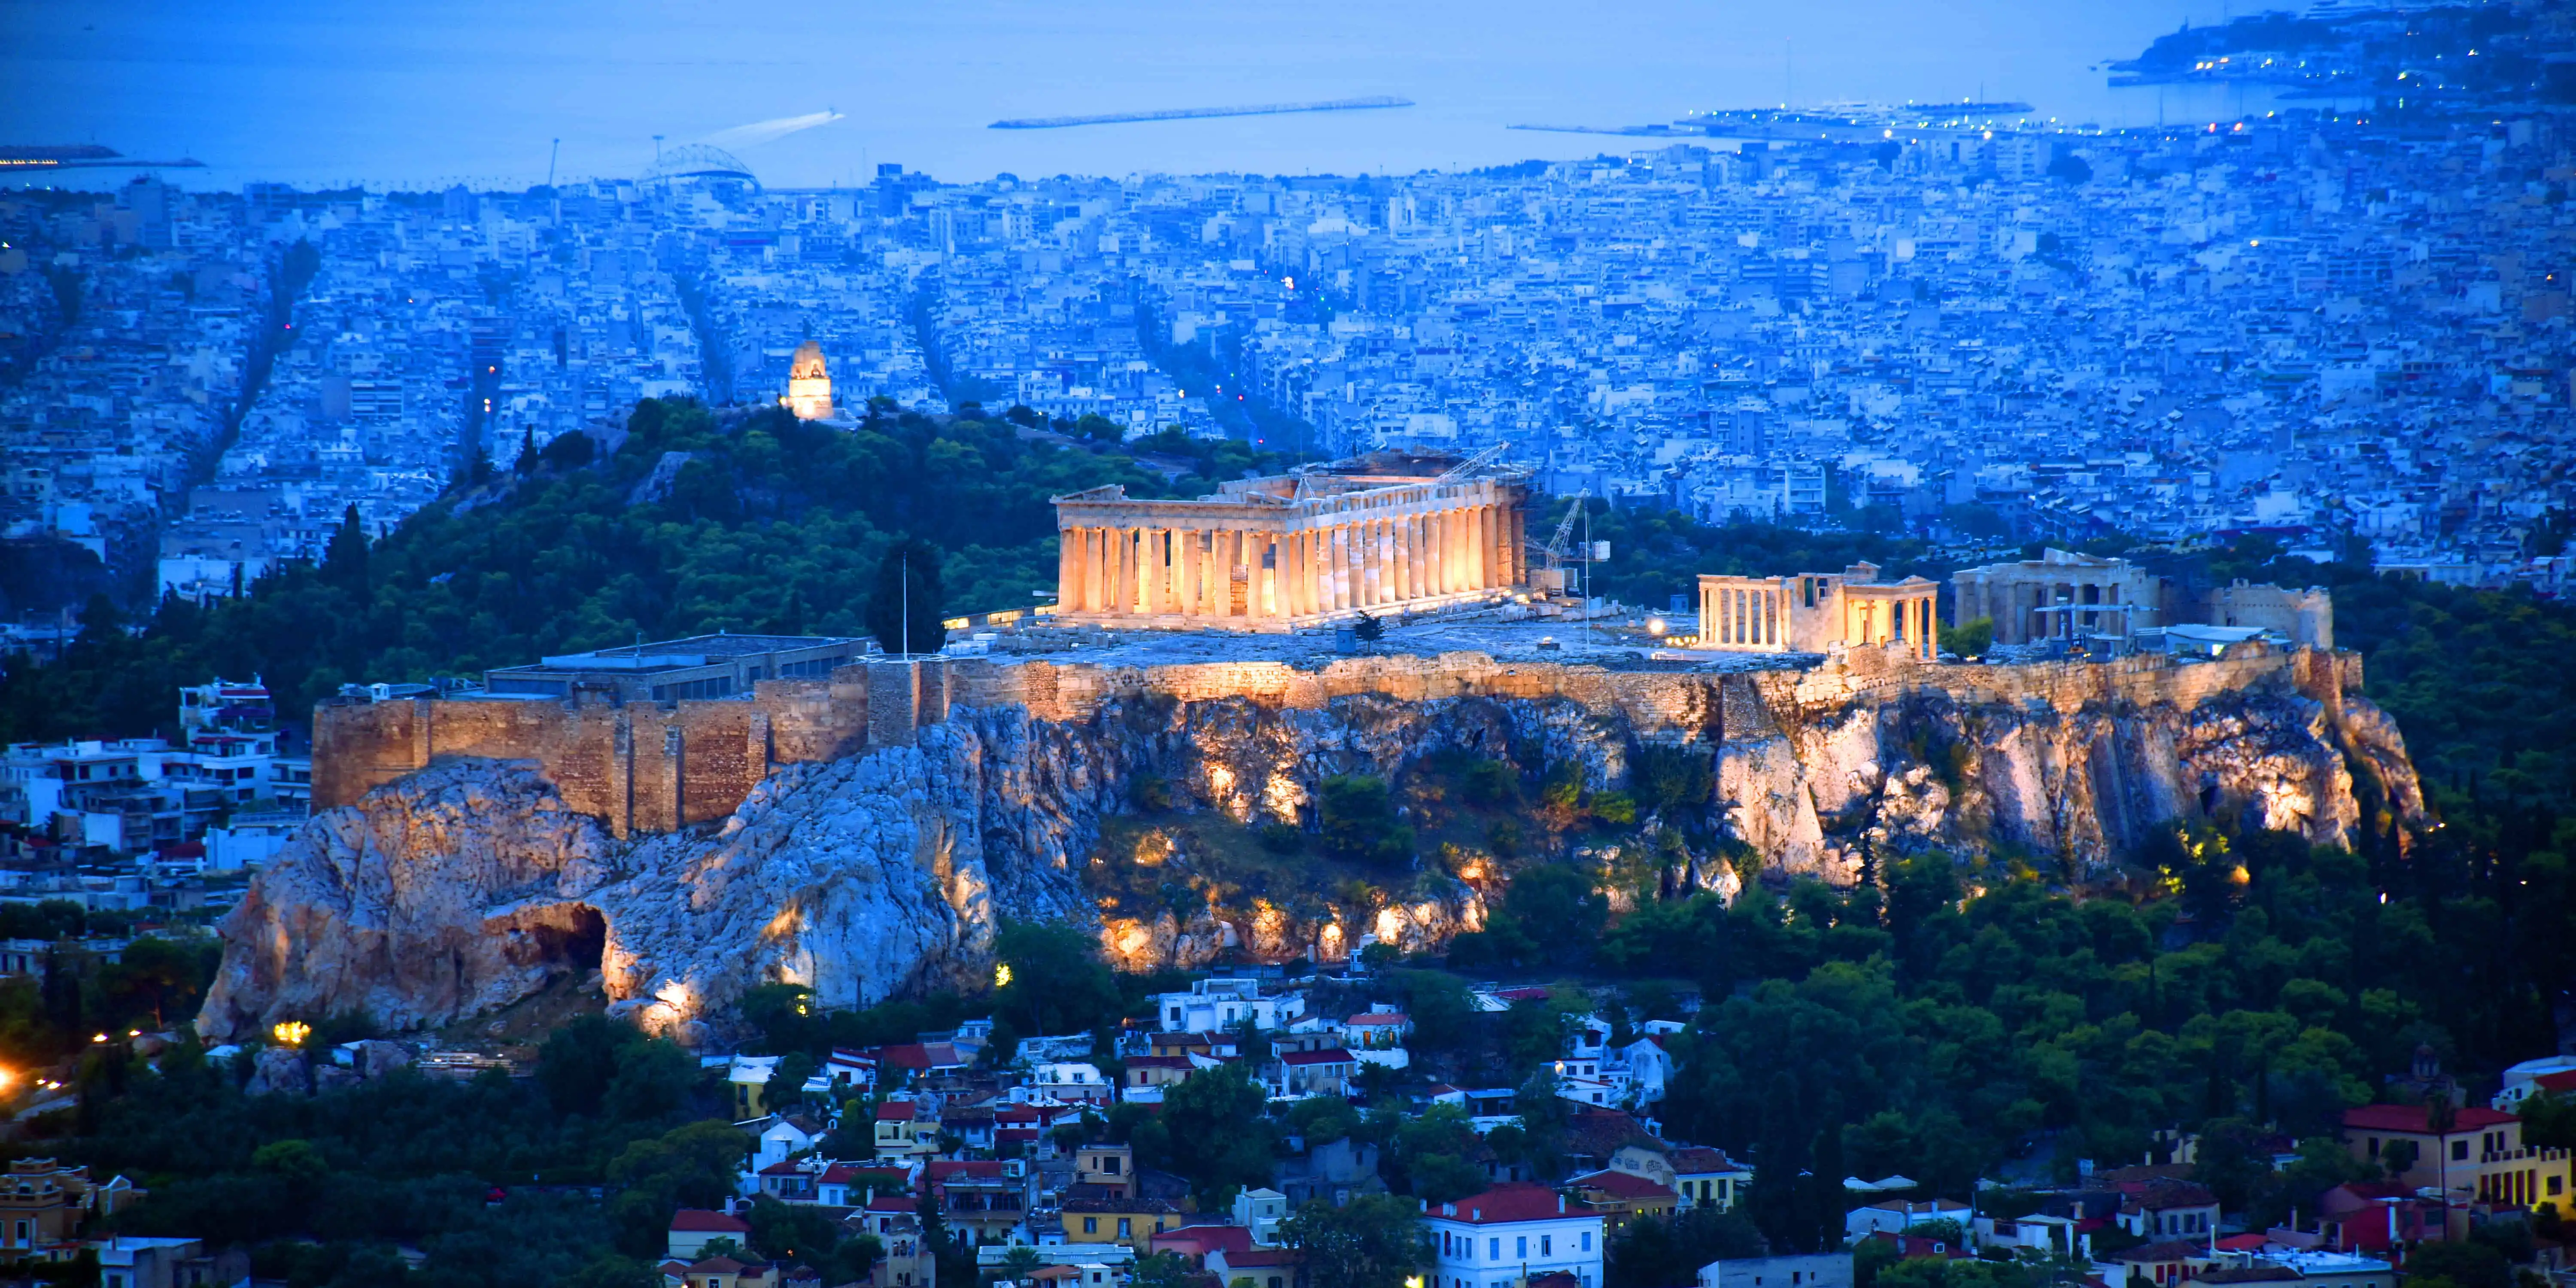 Acropolis at dawn from Mt Lycabettus